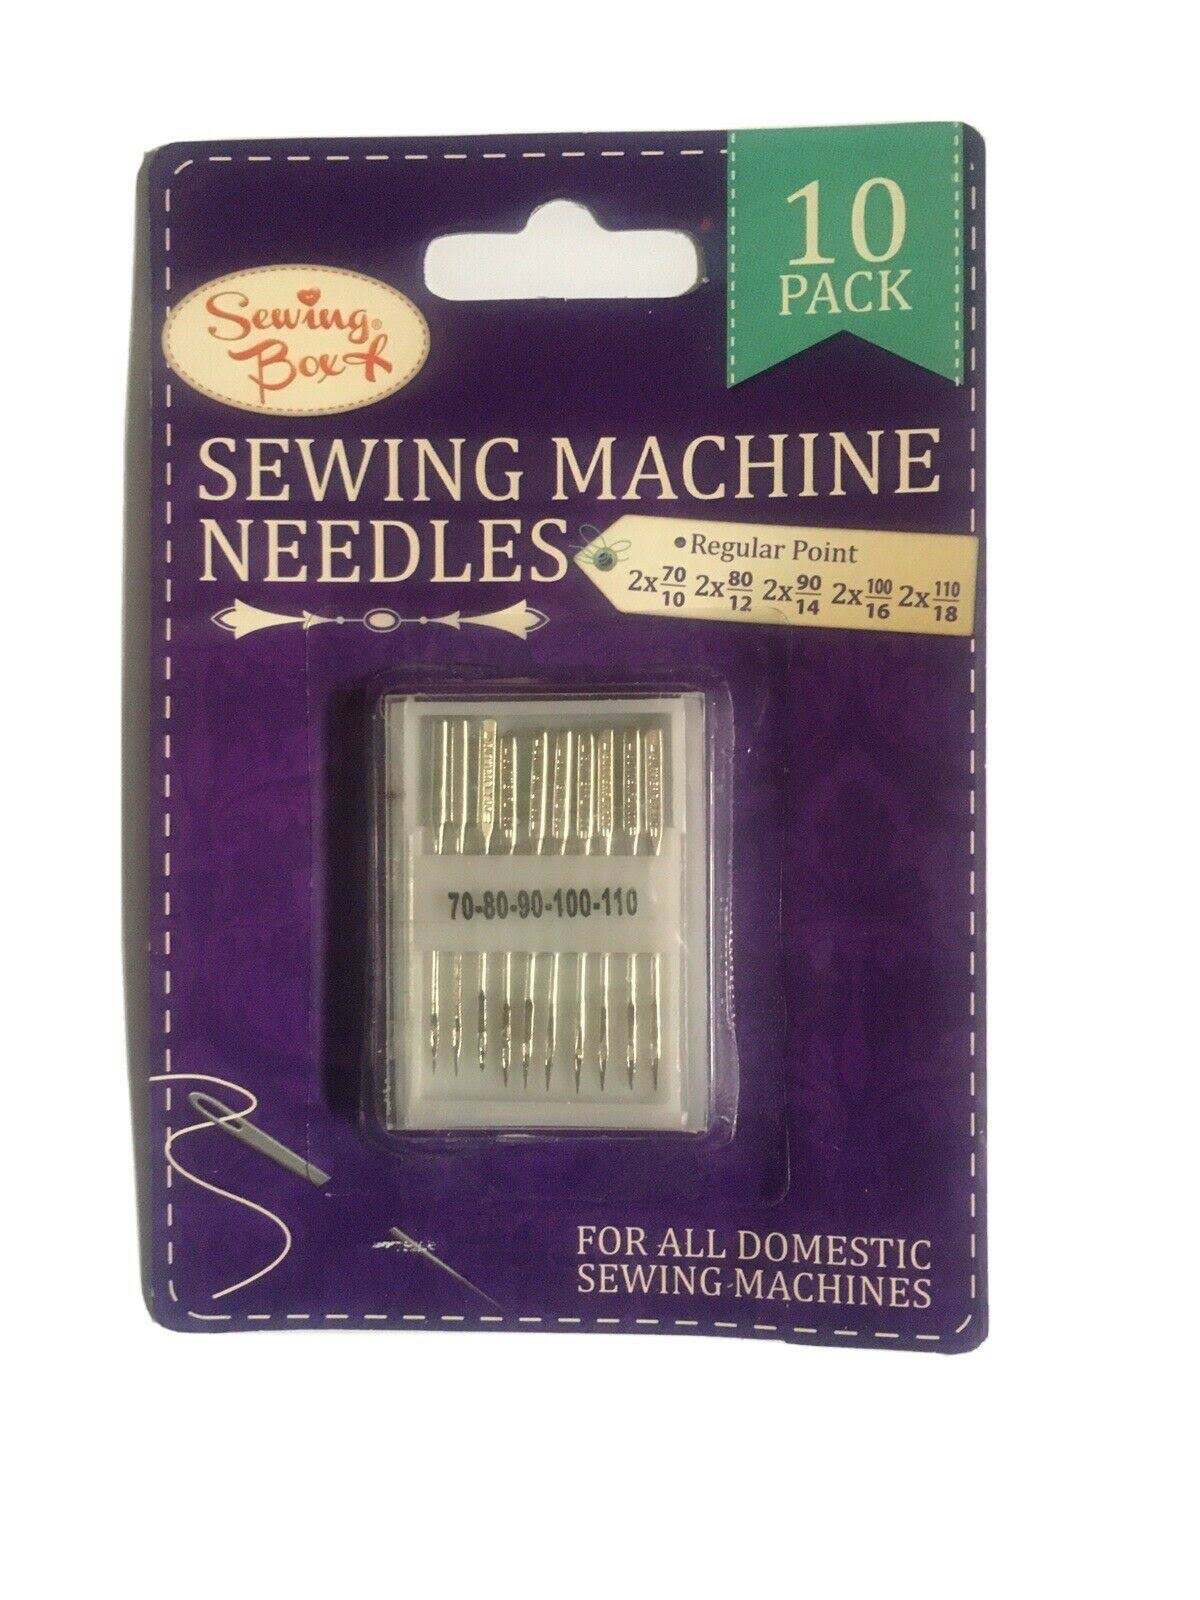 Pack of 10 Sewing Machine Needles in Plastic Box by Sewing Box